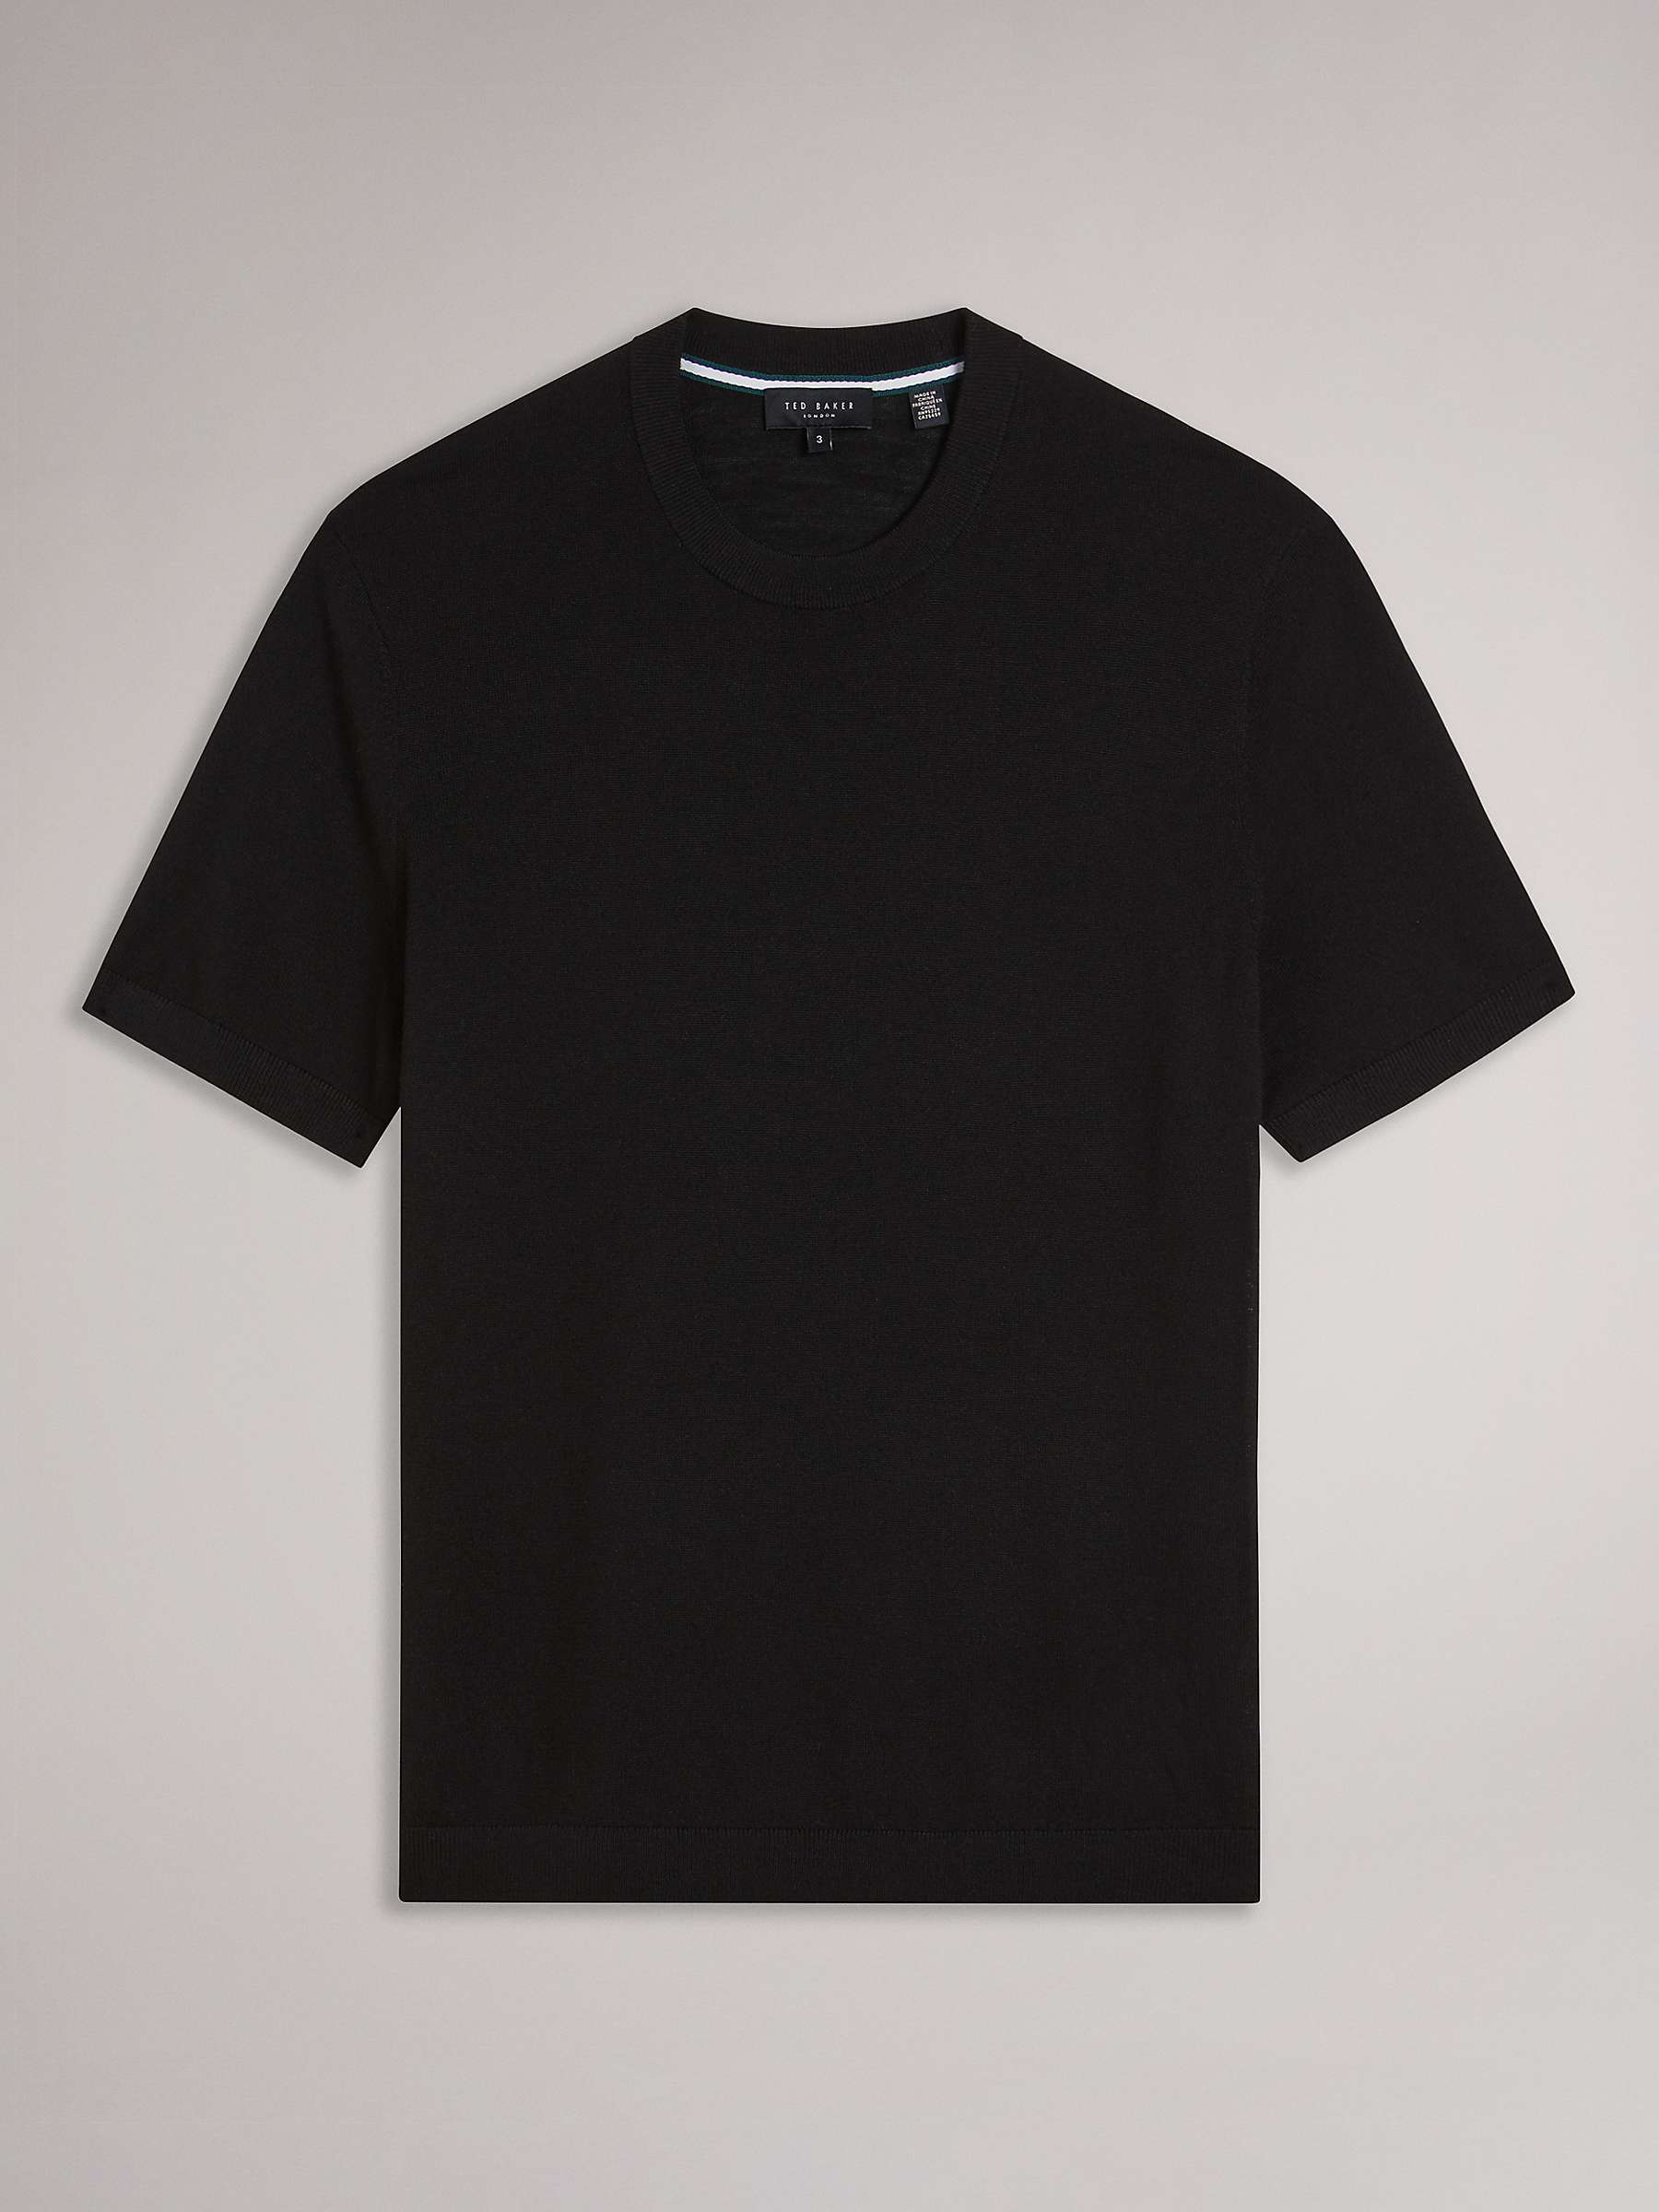 Buy Ted Baker Senti Wool Short Sleeve Knitted T-Shirt Online at johnlewis.com